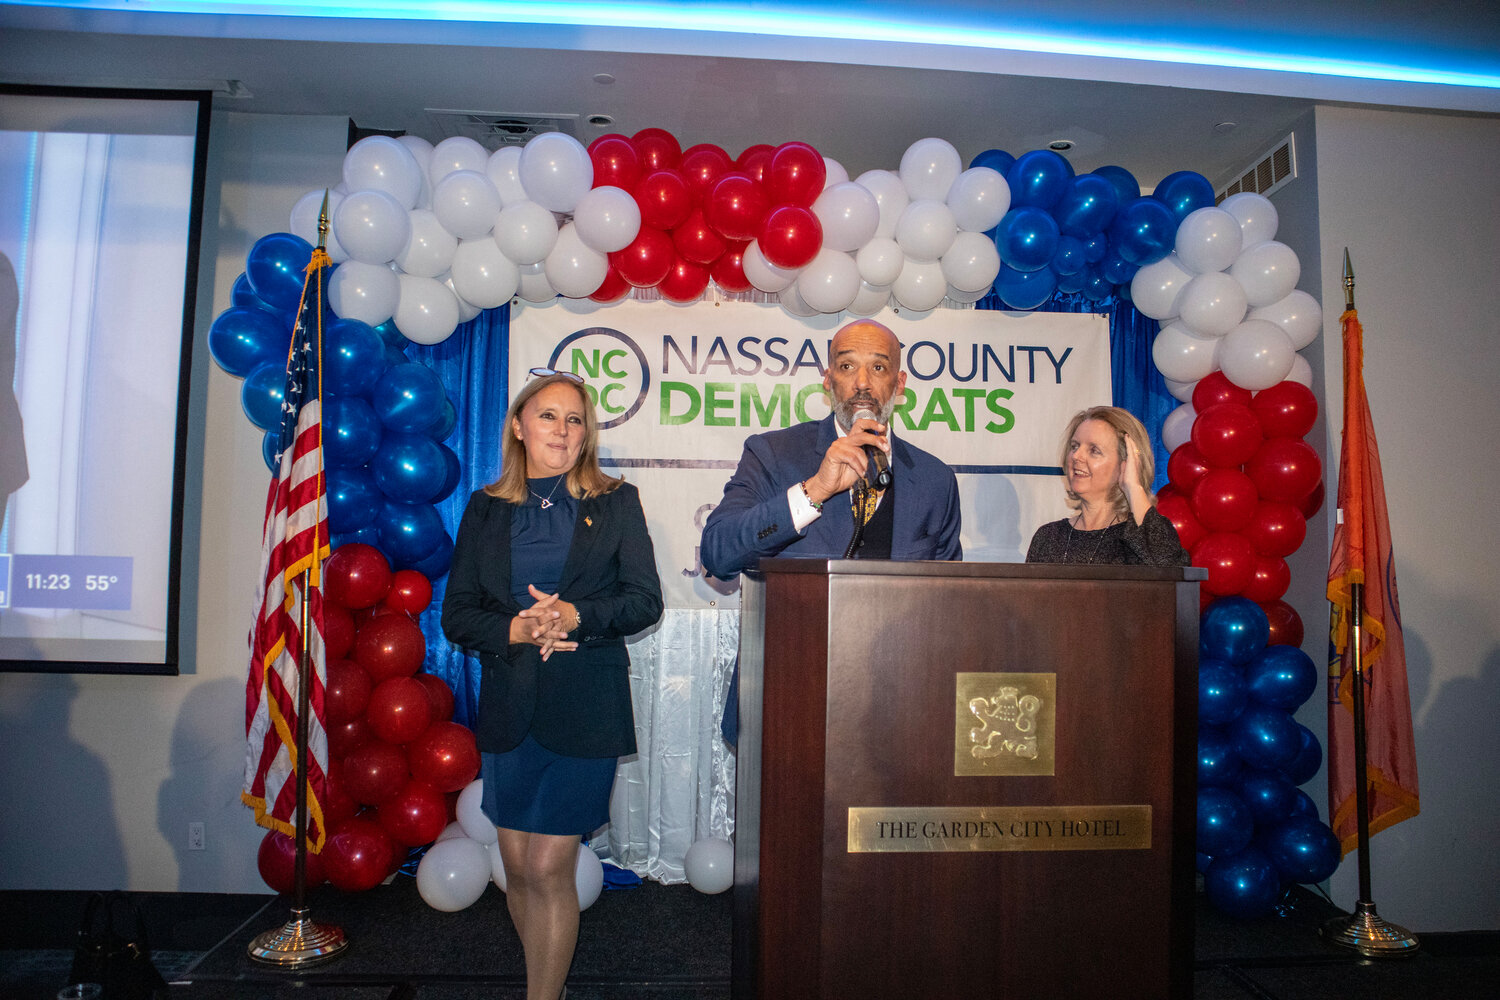 Scott Davis declares victory in the Nassau County Legislature’s 1st District at the Democratic watch party, having defeated his Republican opponent, Michael Lucchesi, with 55 percent of the vote.